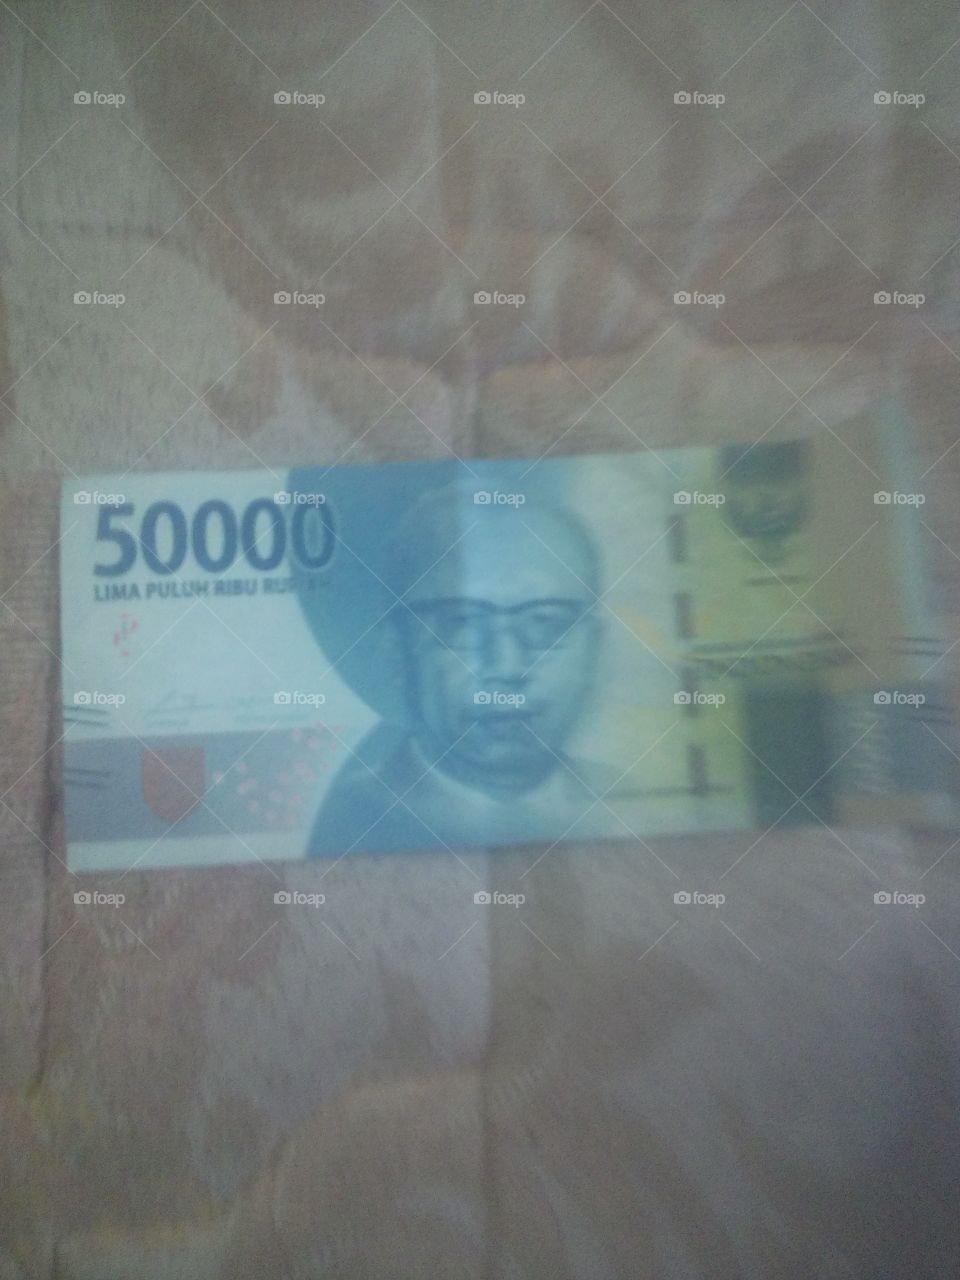 this is my rupiah